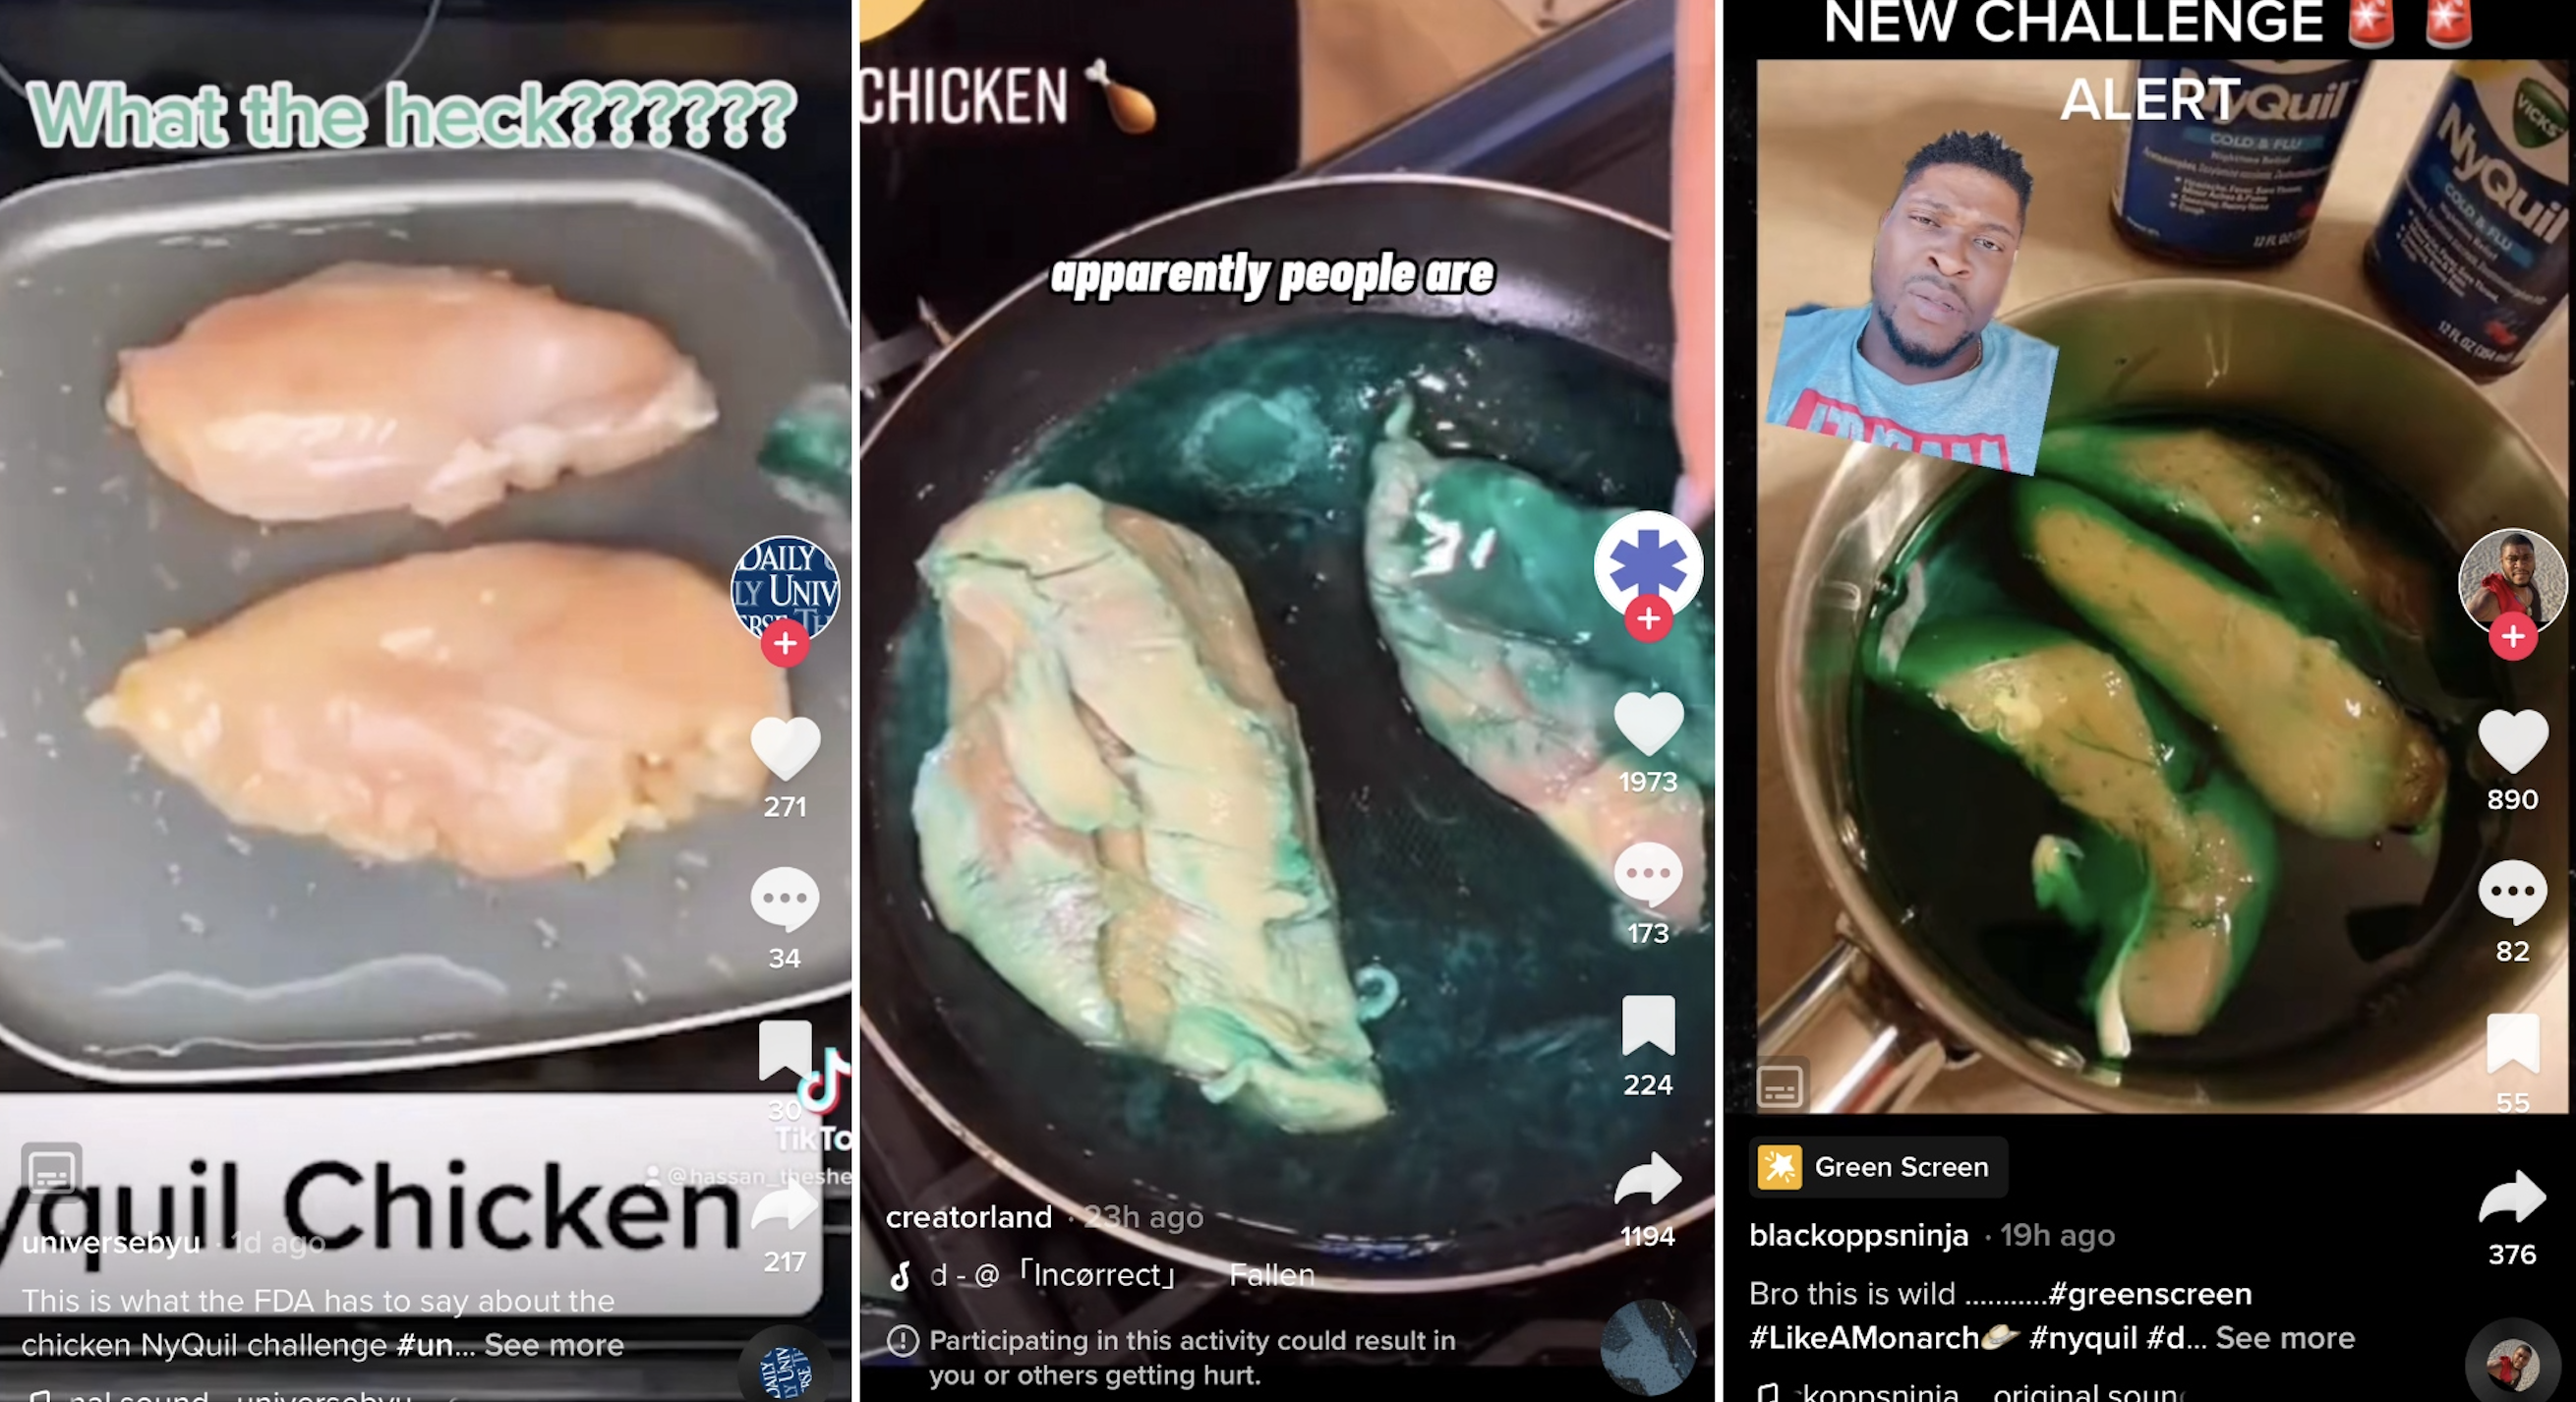 No, NyQuil chicken isn’t a real TikTok trend